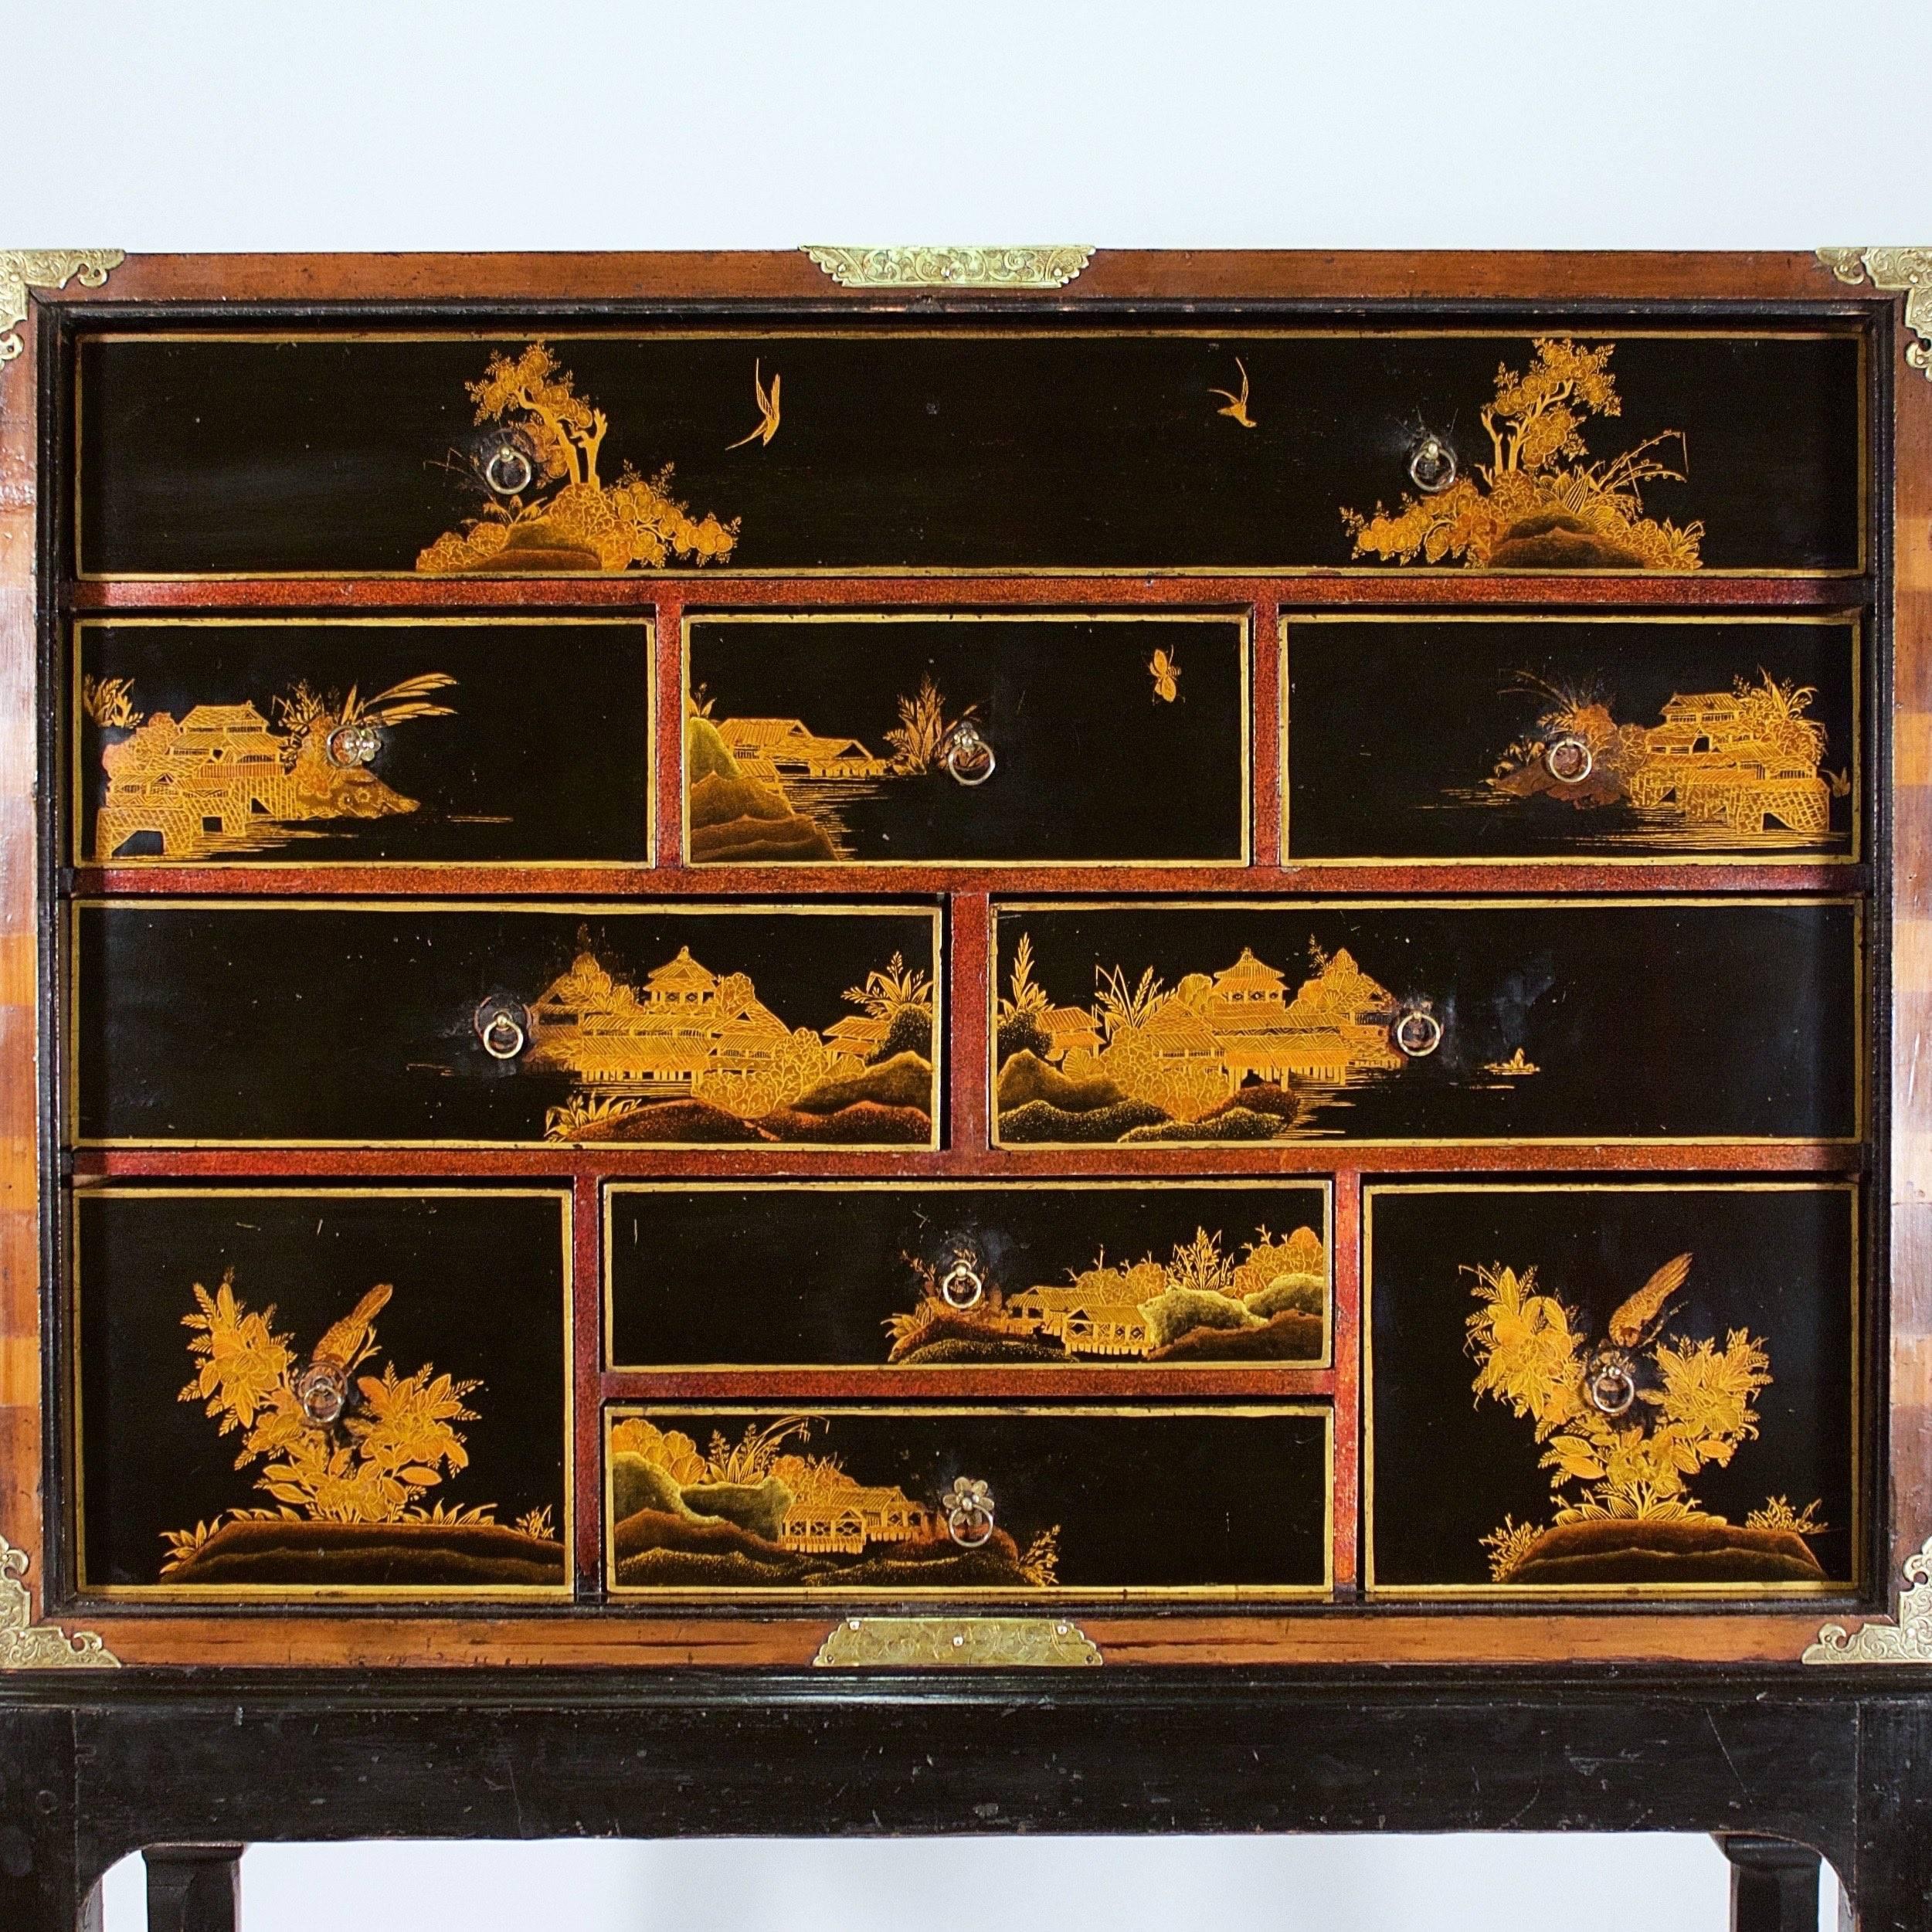 Gilt Late 17th Century Japanese Export Brass-Mounted Black Lacquer Cabinet on Stand